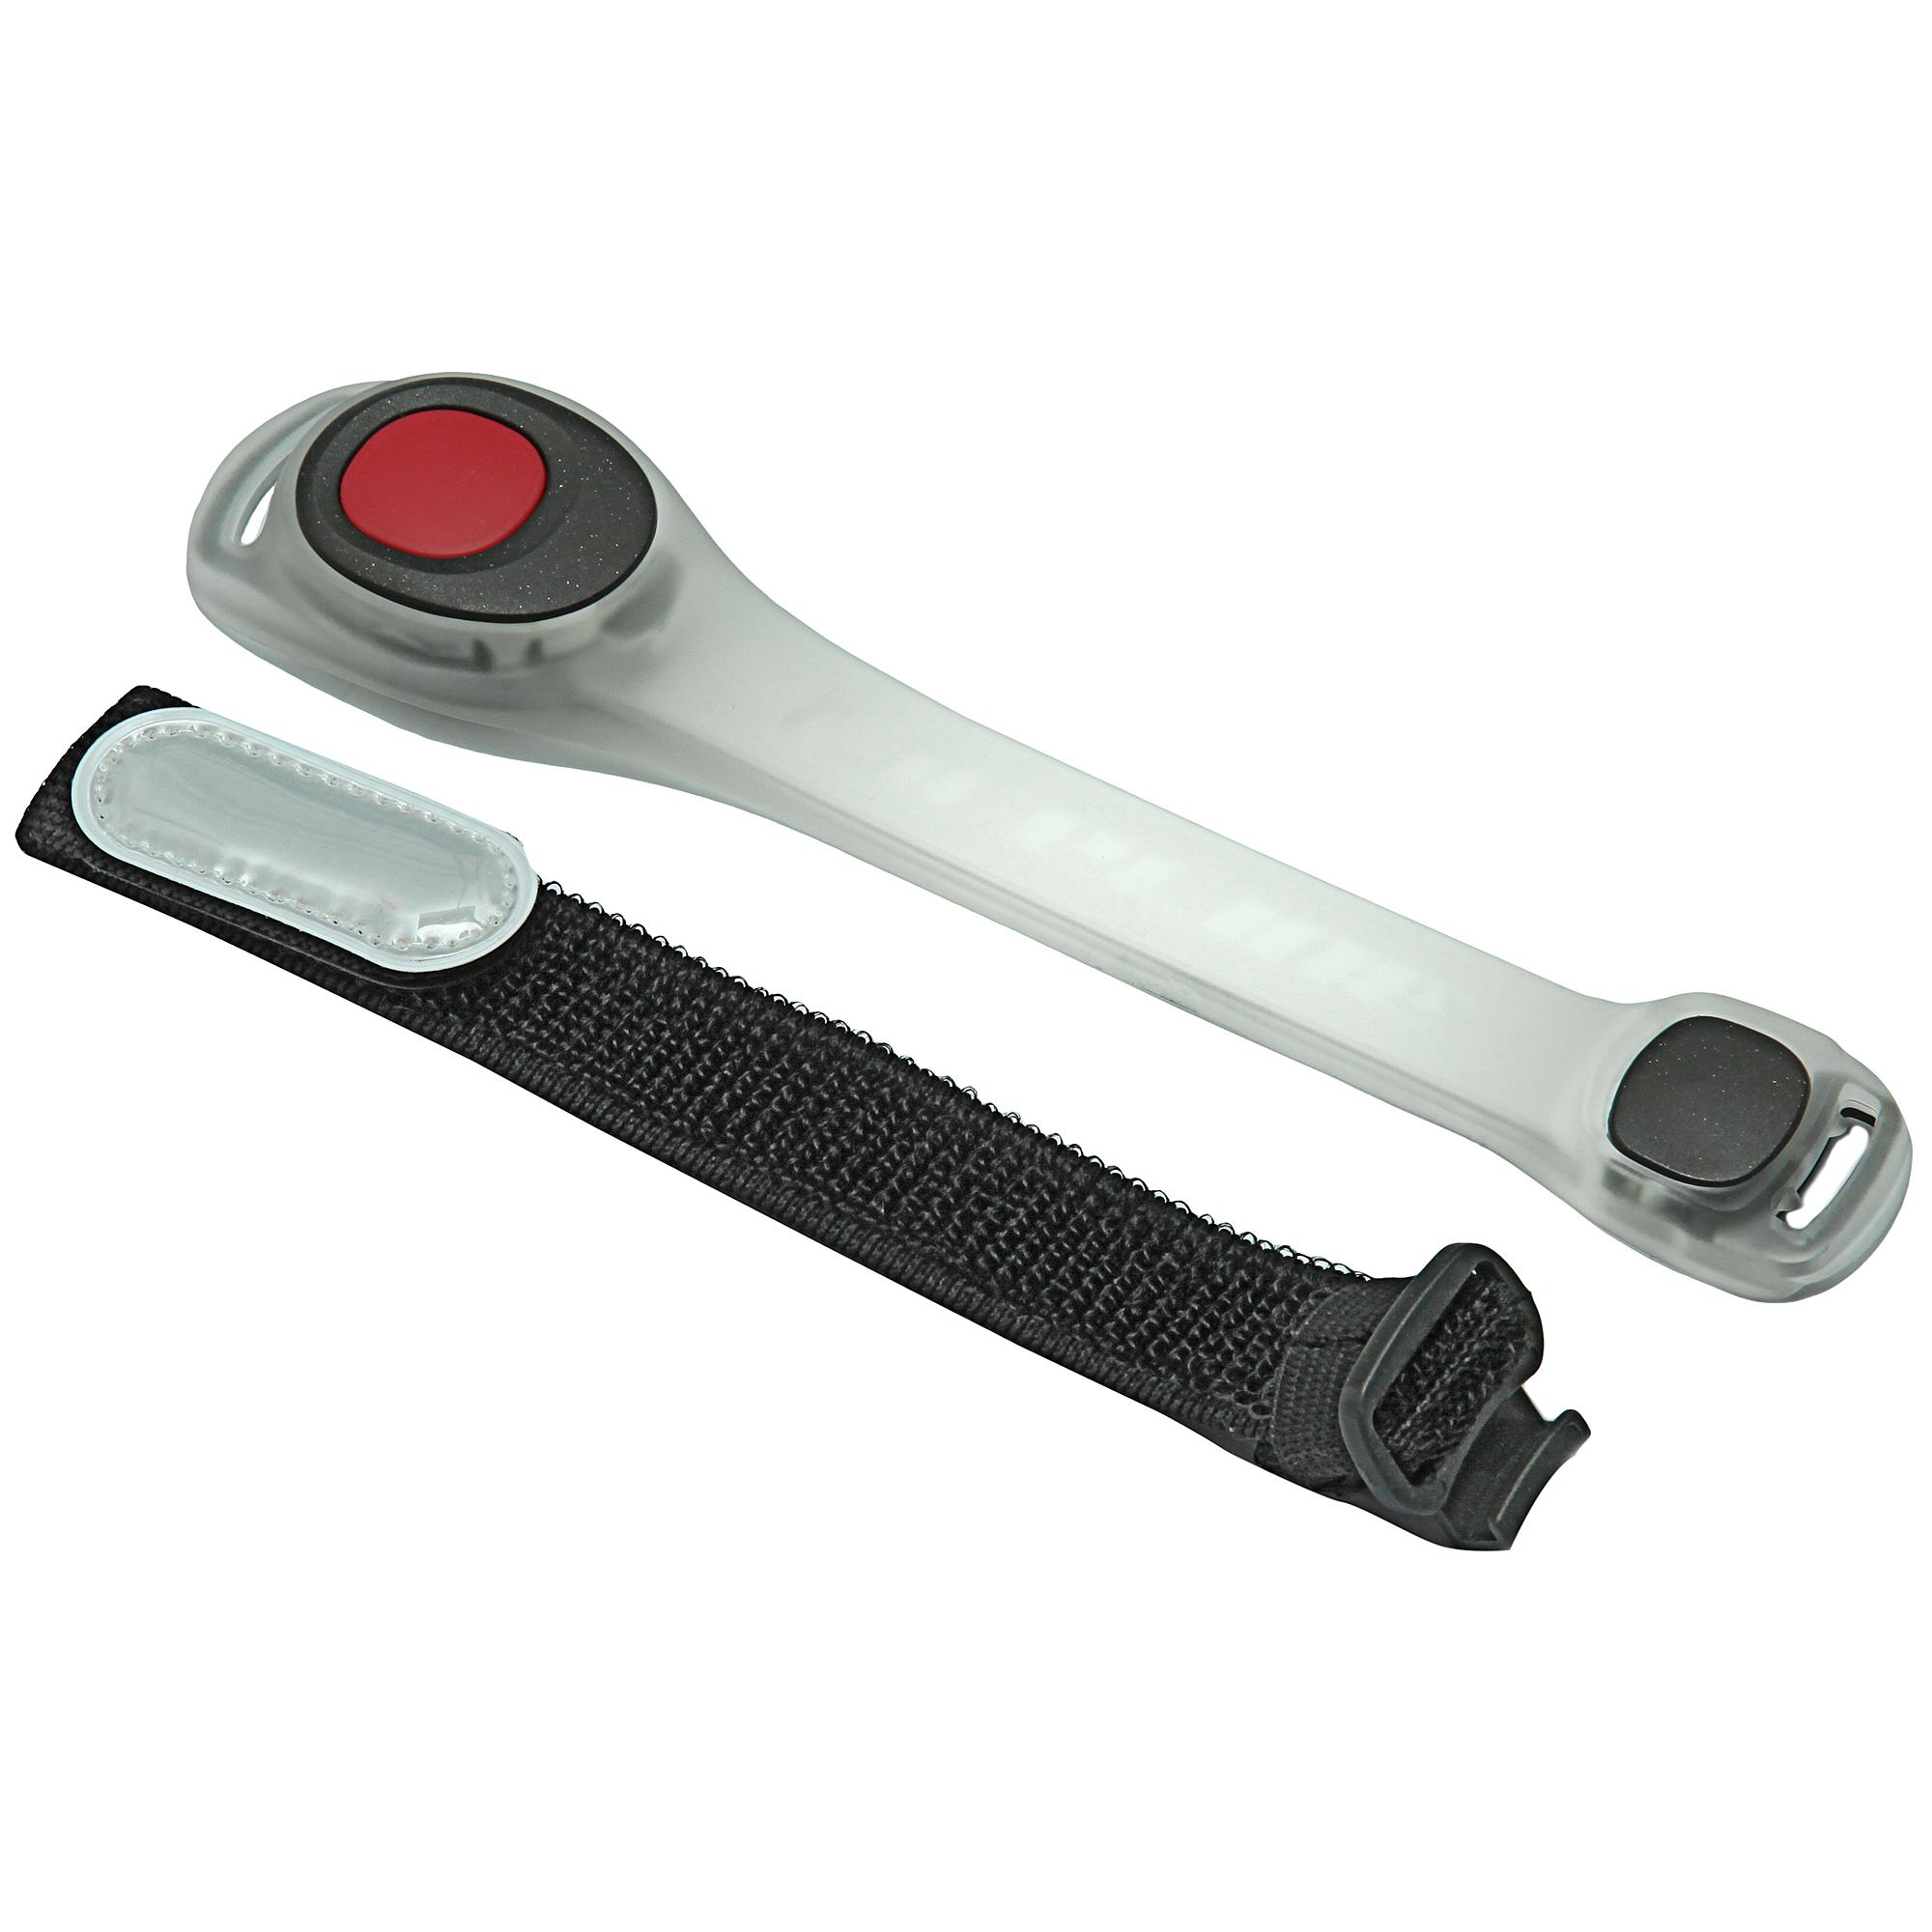 Lifeline Arm Band Safety Light  Red